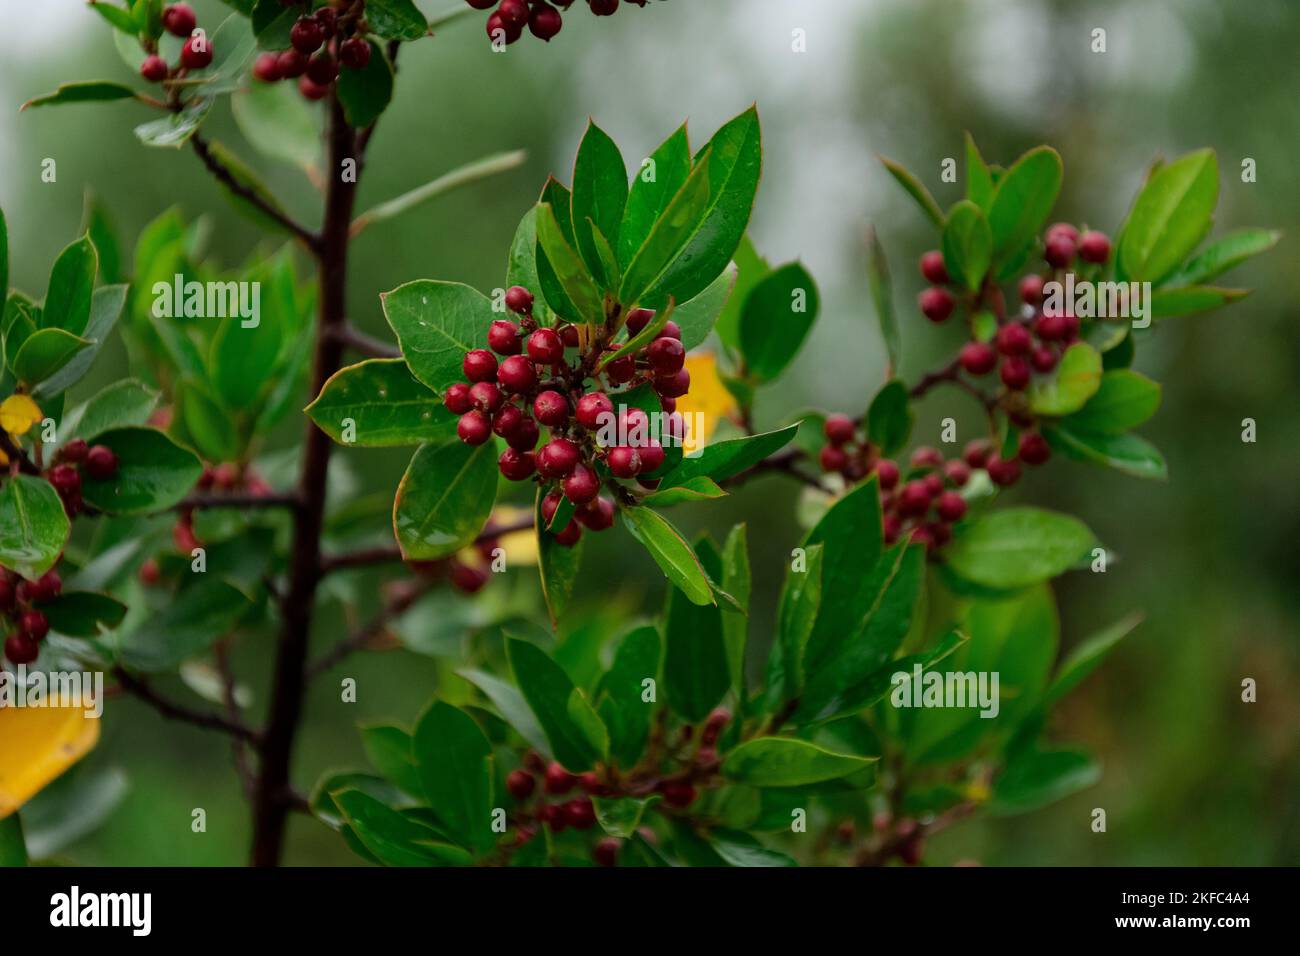 A closeup of the Rhamnus Alaternus plant branch with leaves and red berries Stock Photo